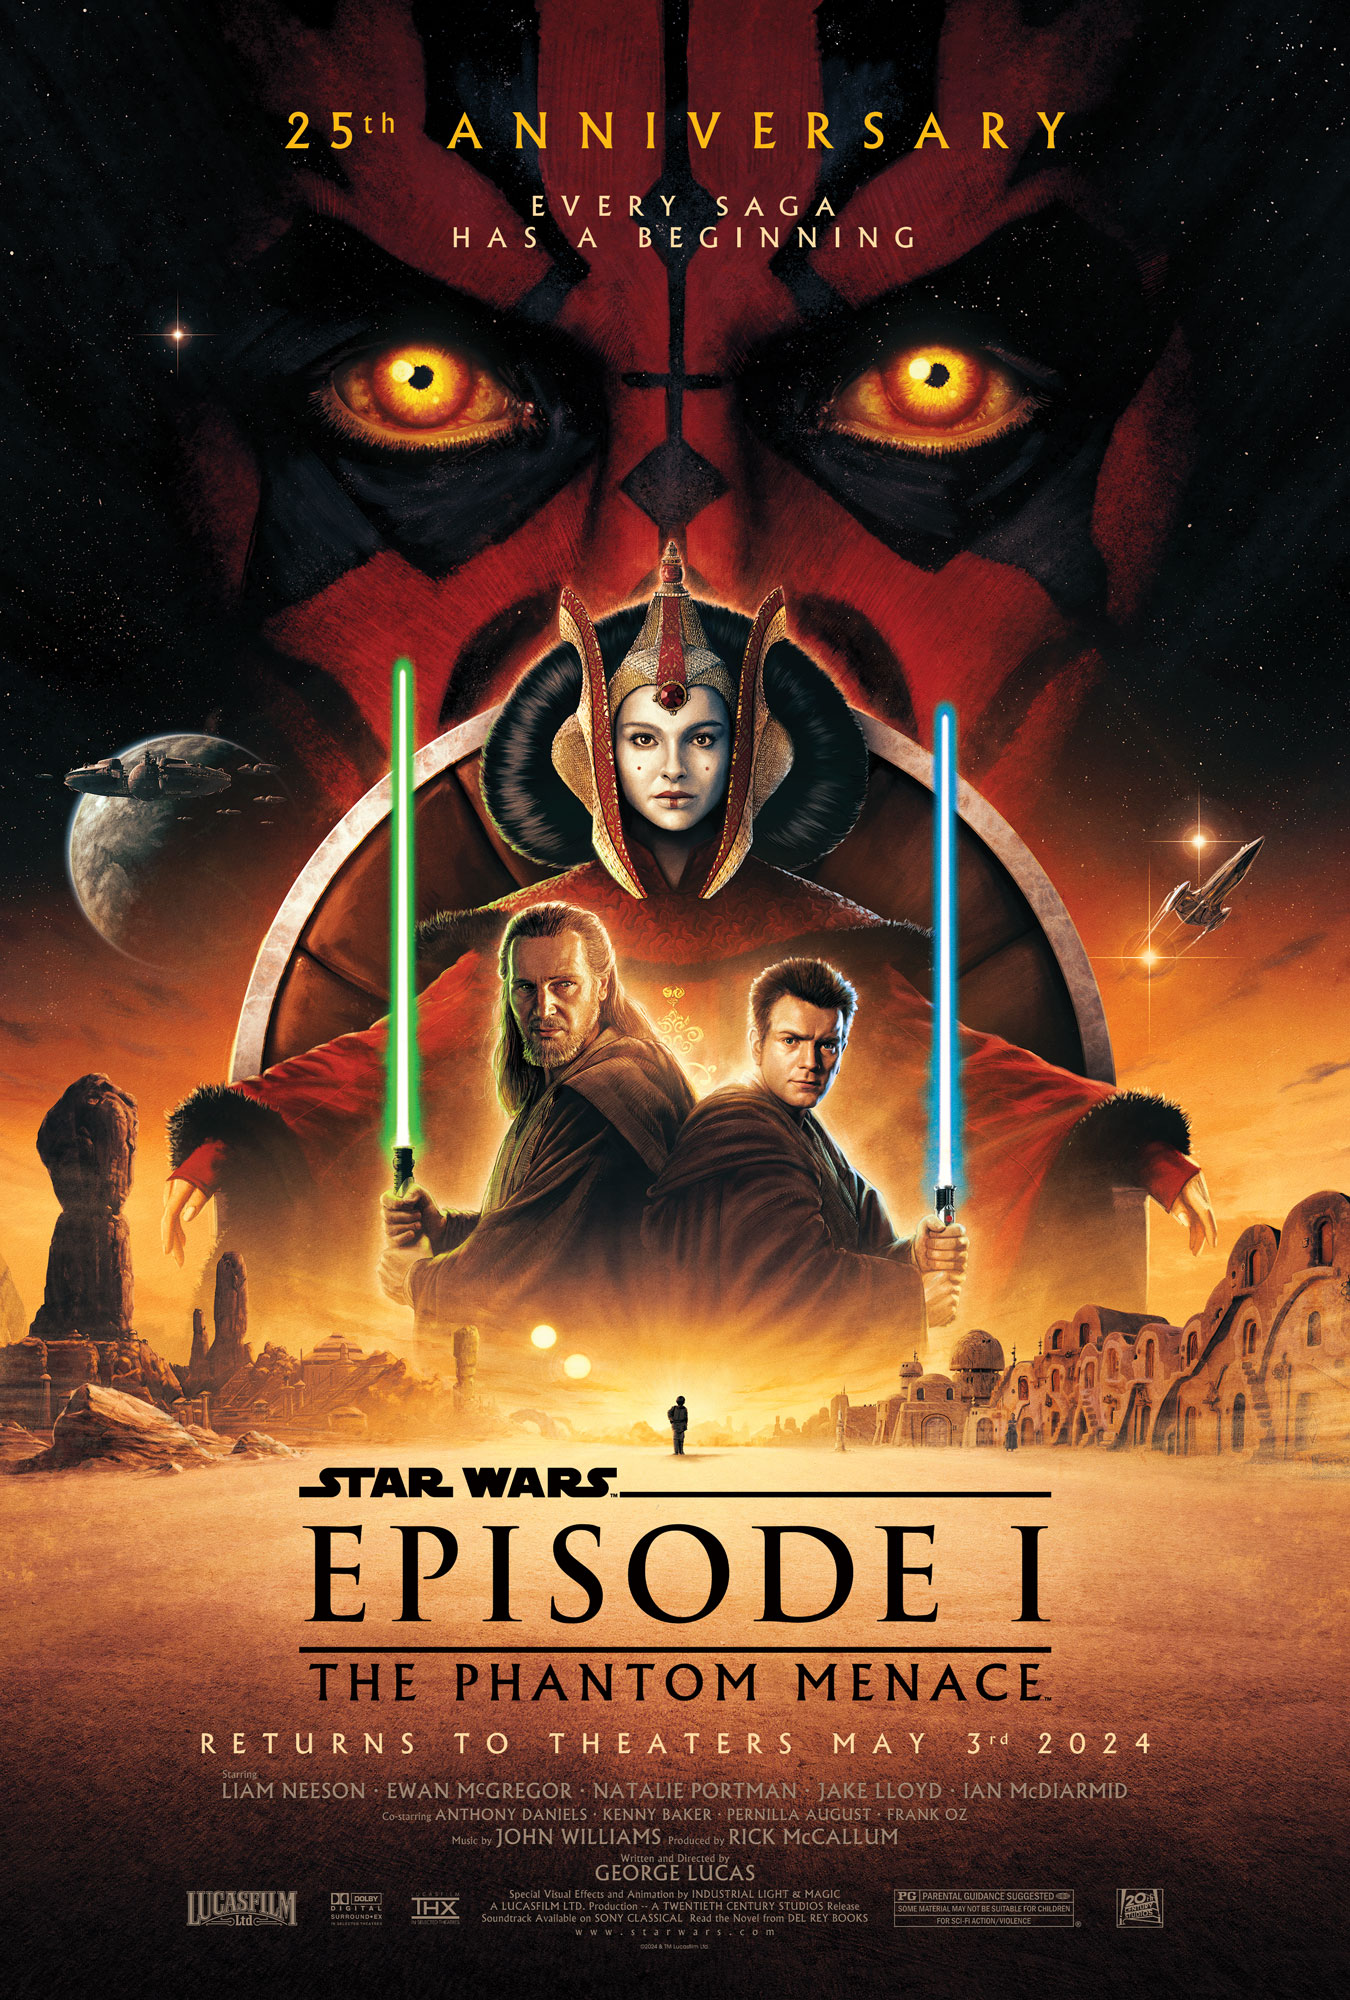 Star Wars: Episode I The Phantom Menace 25th Anniversary Cinema Release Confirmed For May The 4th